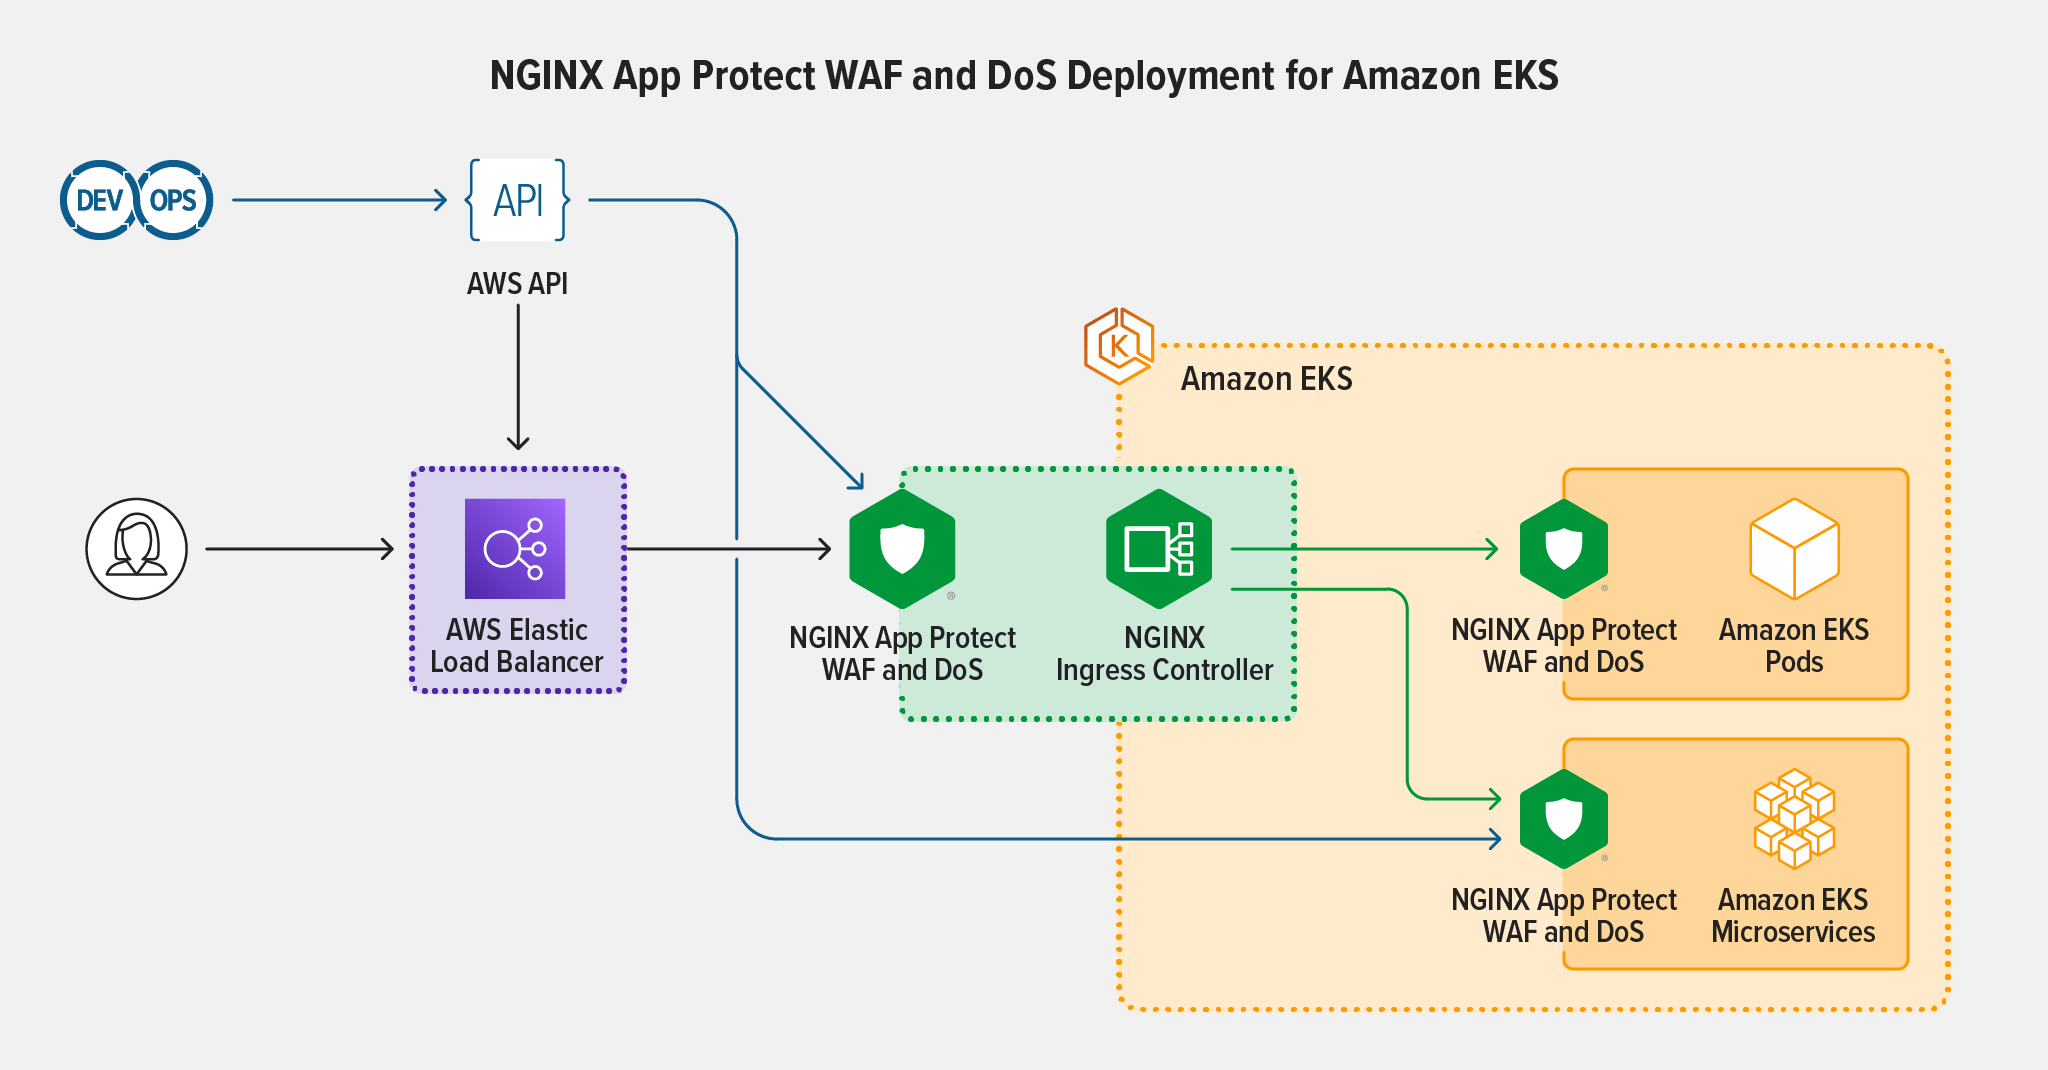 Diagram showing topology for deploying NGINX App Protect WAF and DoS on NGINX Ingress Controller in Amazon EKS